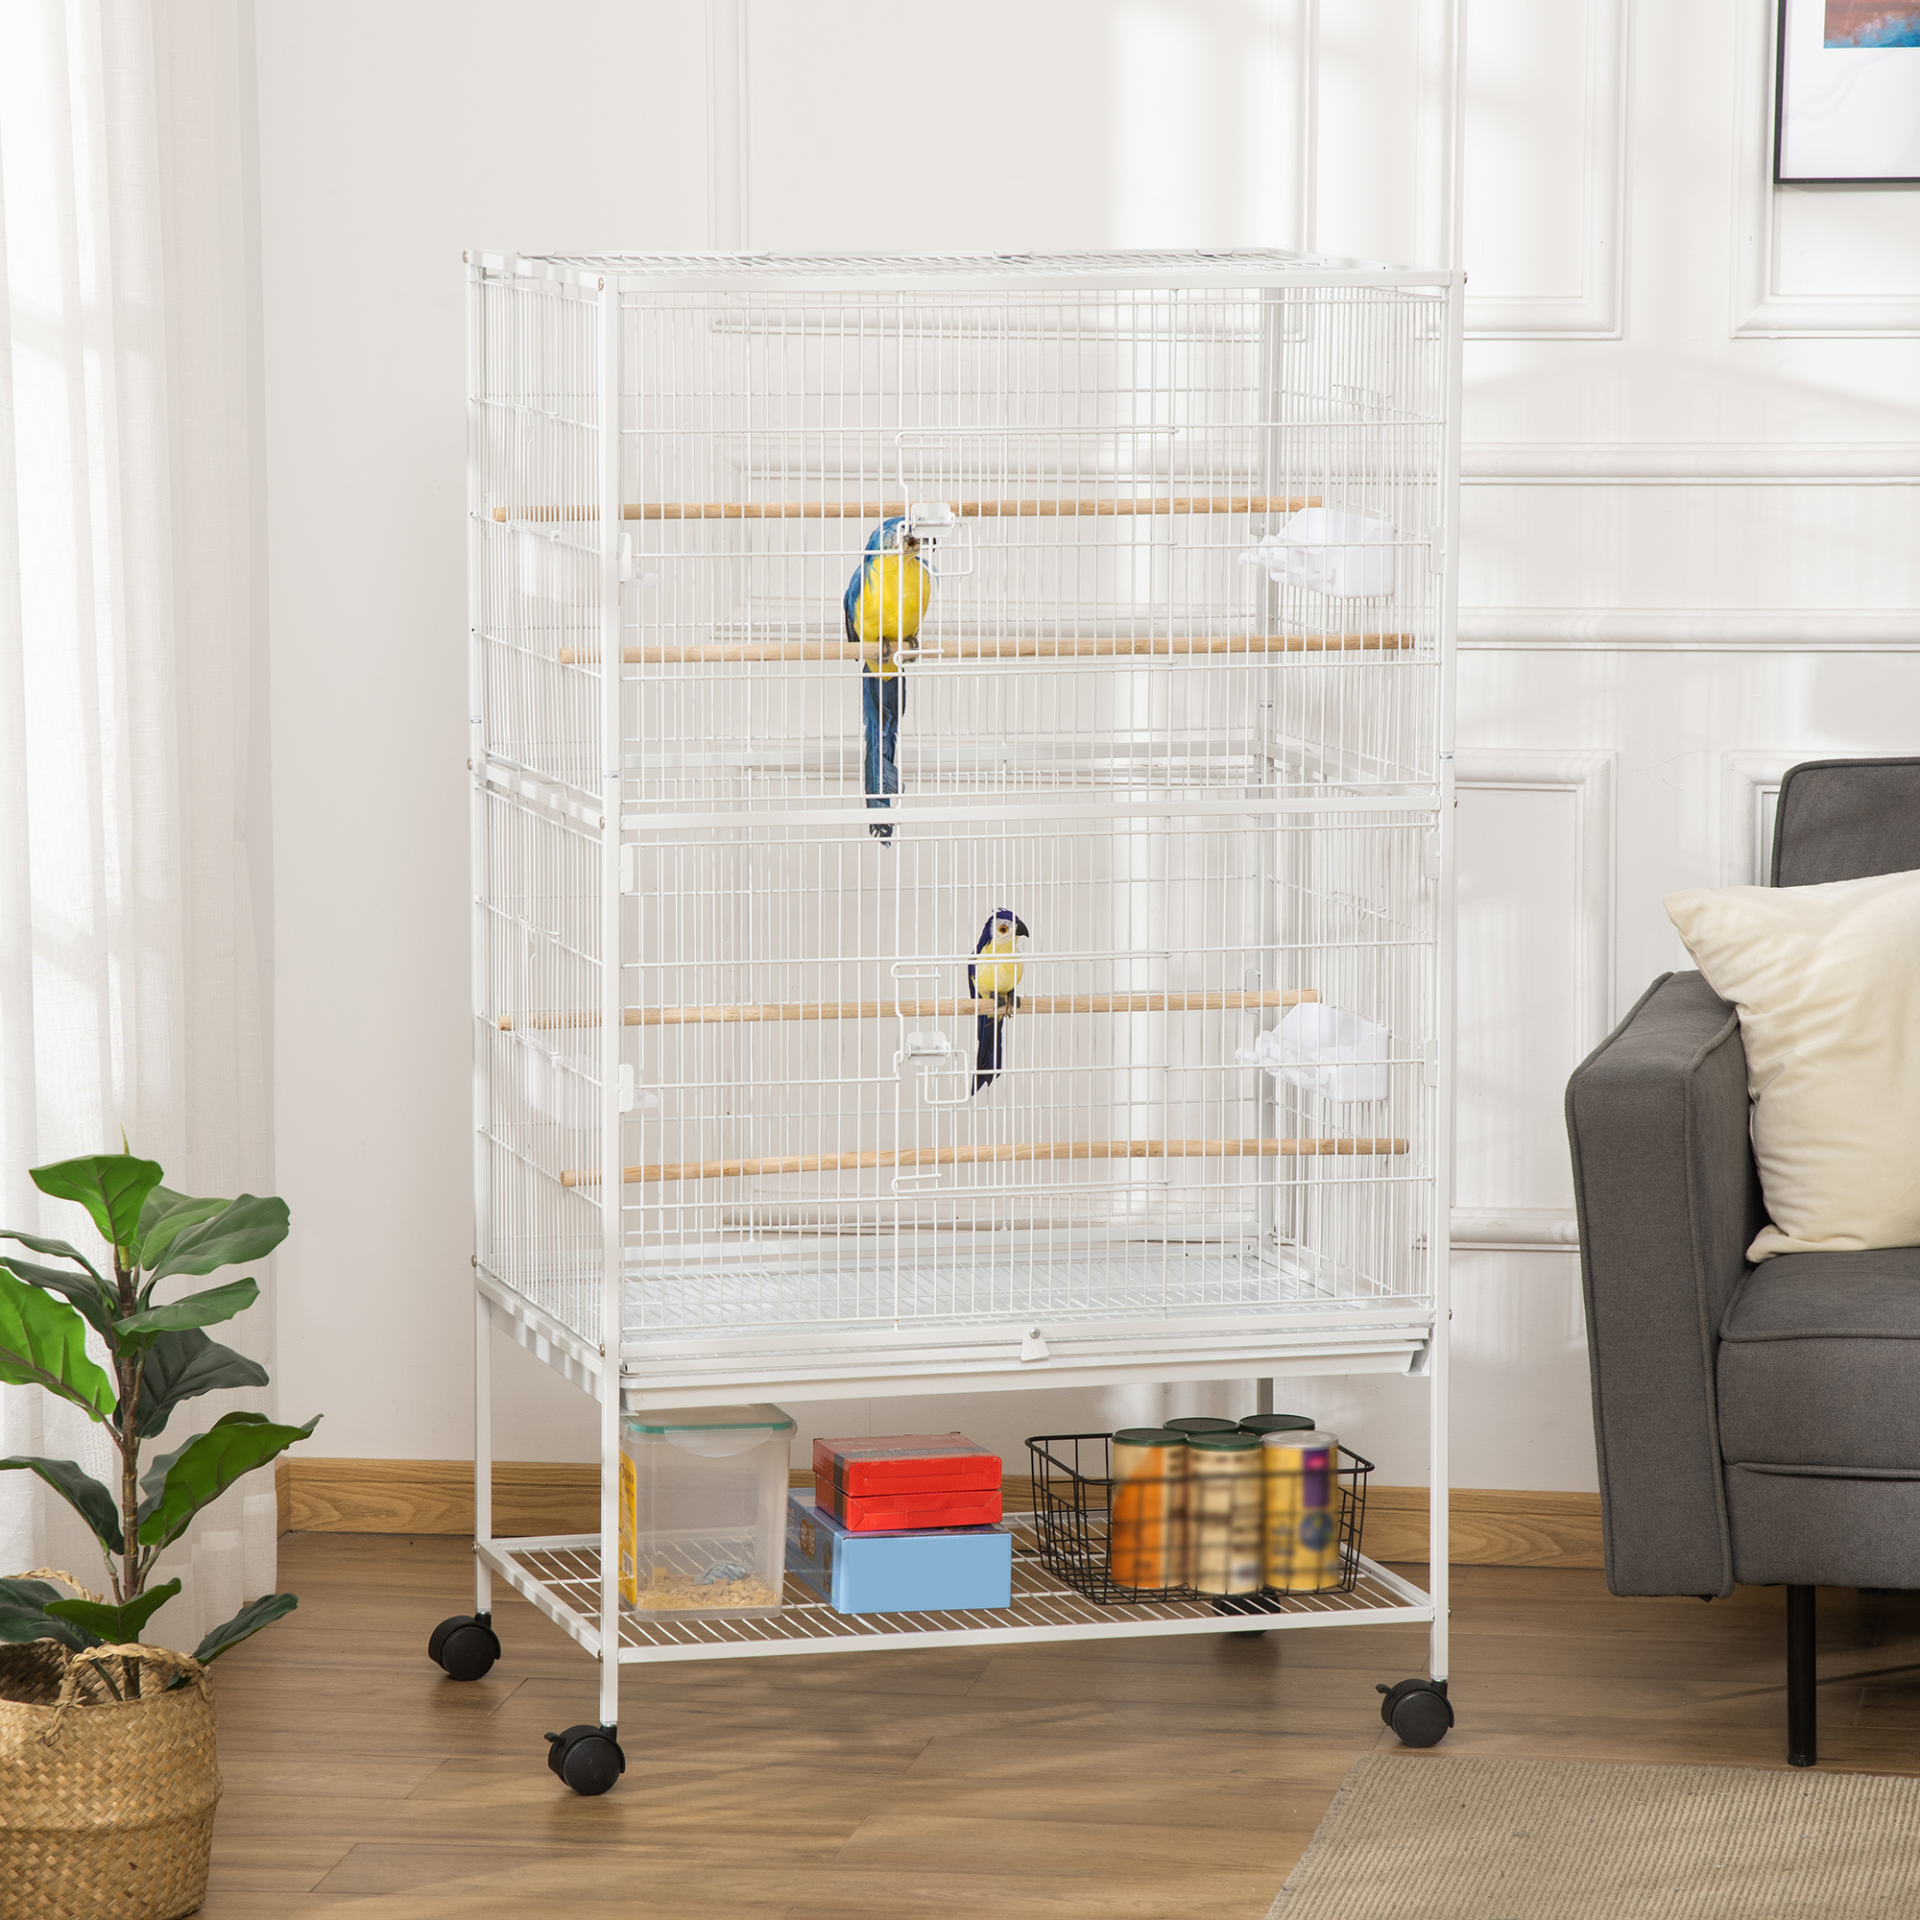 PawHut Large Bird Cage Budgie Cage for Finch Canaries Parakeet with Rolling Stand, Slide-out Tray, Storage Shelf, Food Containers, White